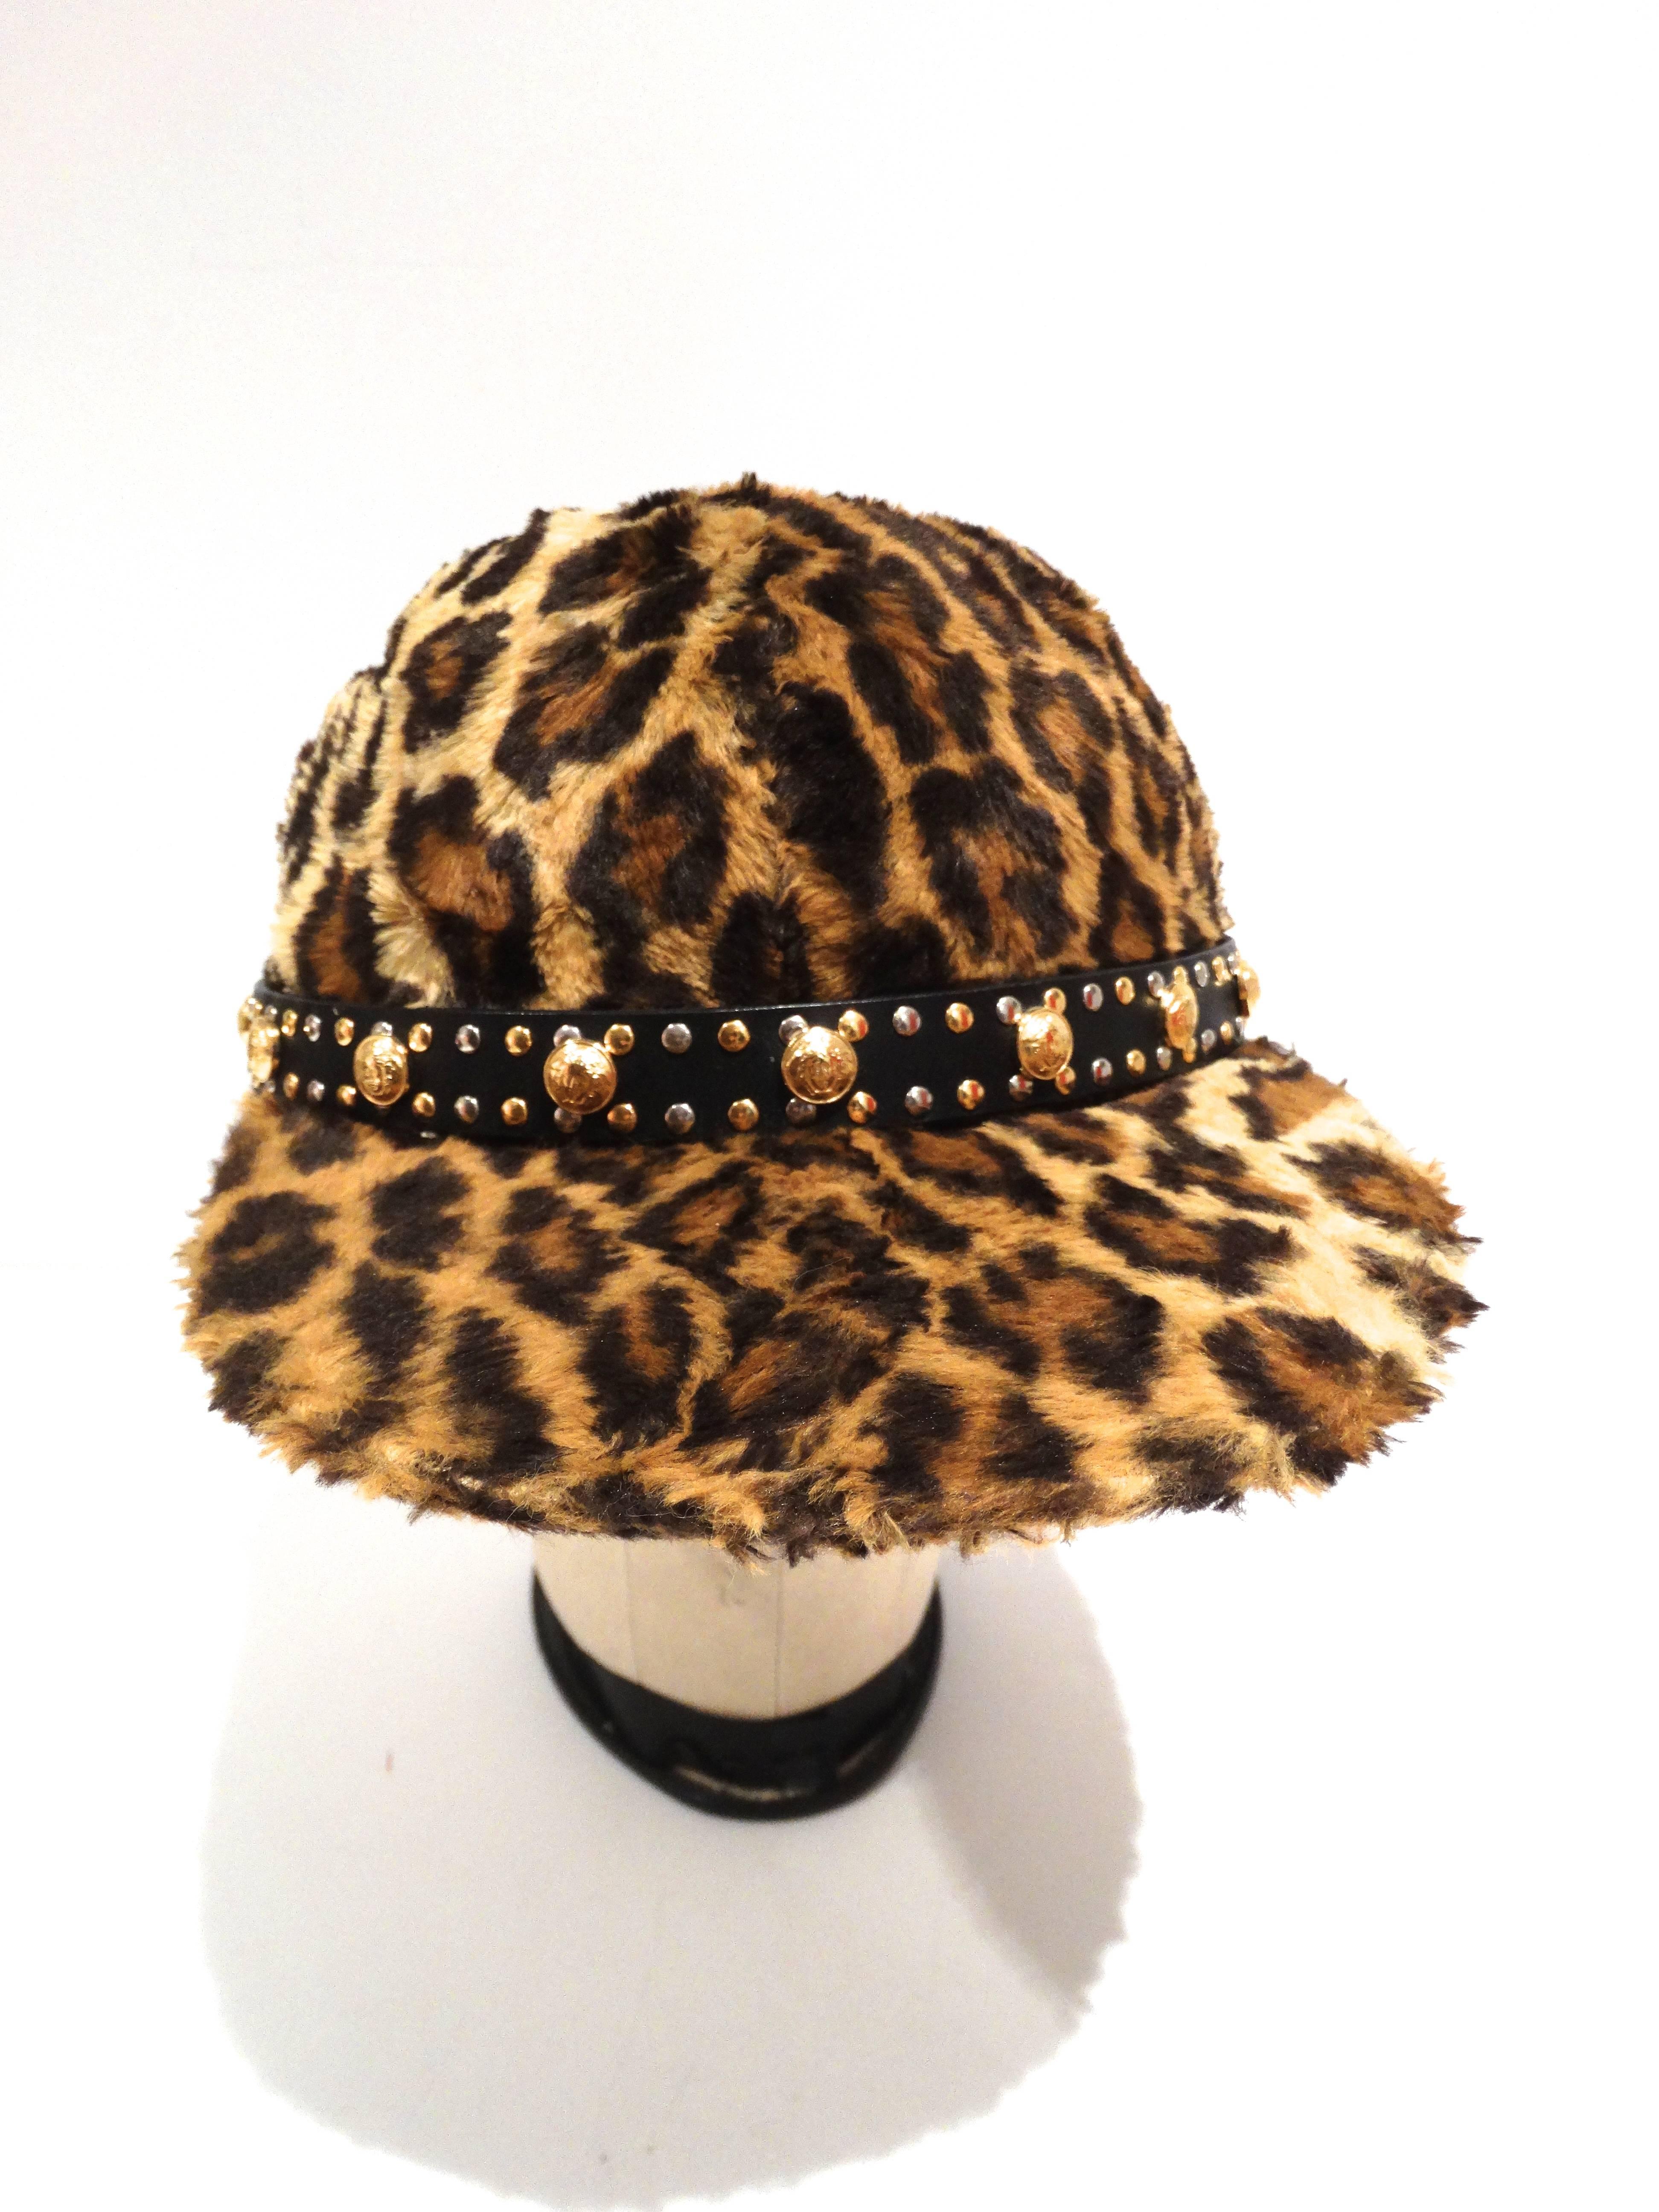 A true collectors piece, this 1992 Versace baseball cap style is covered in faux Leopard fur, leather belt hat band with gold medusa heads and silver and gold studs. This cap has a gold plated buckle in the back to adjust to fit a smaller size.